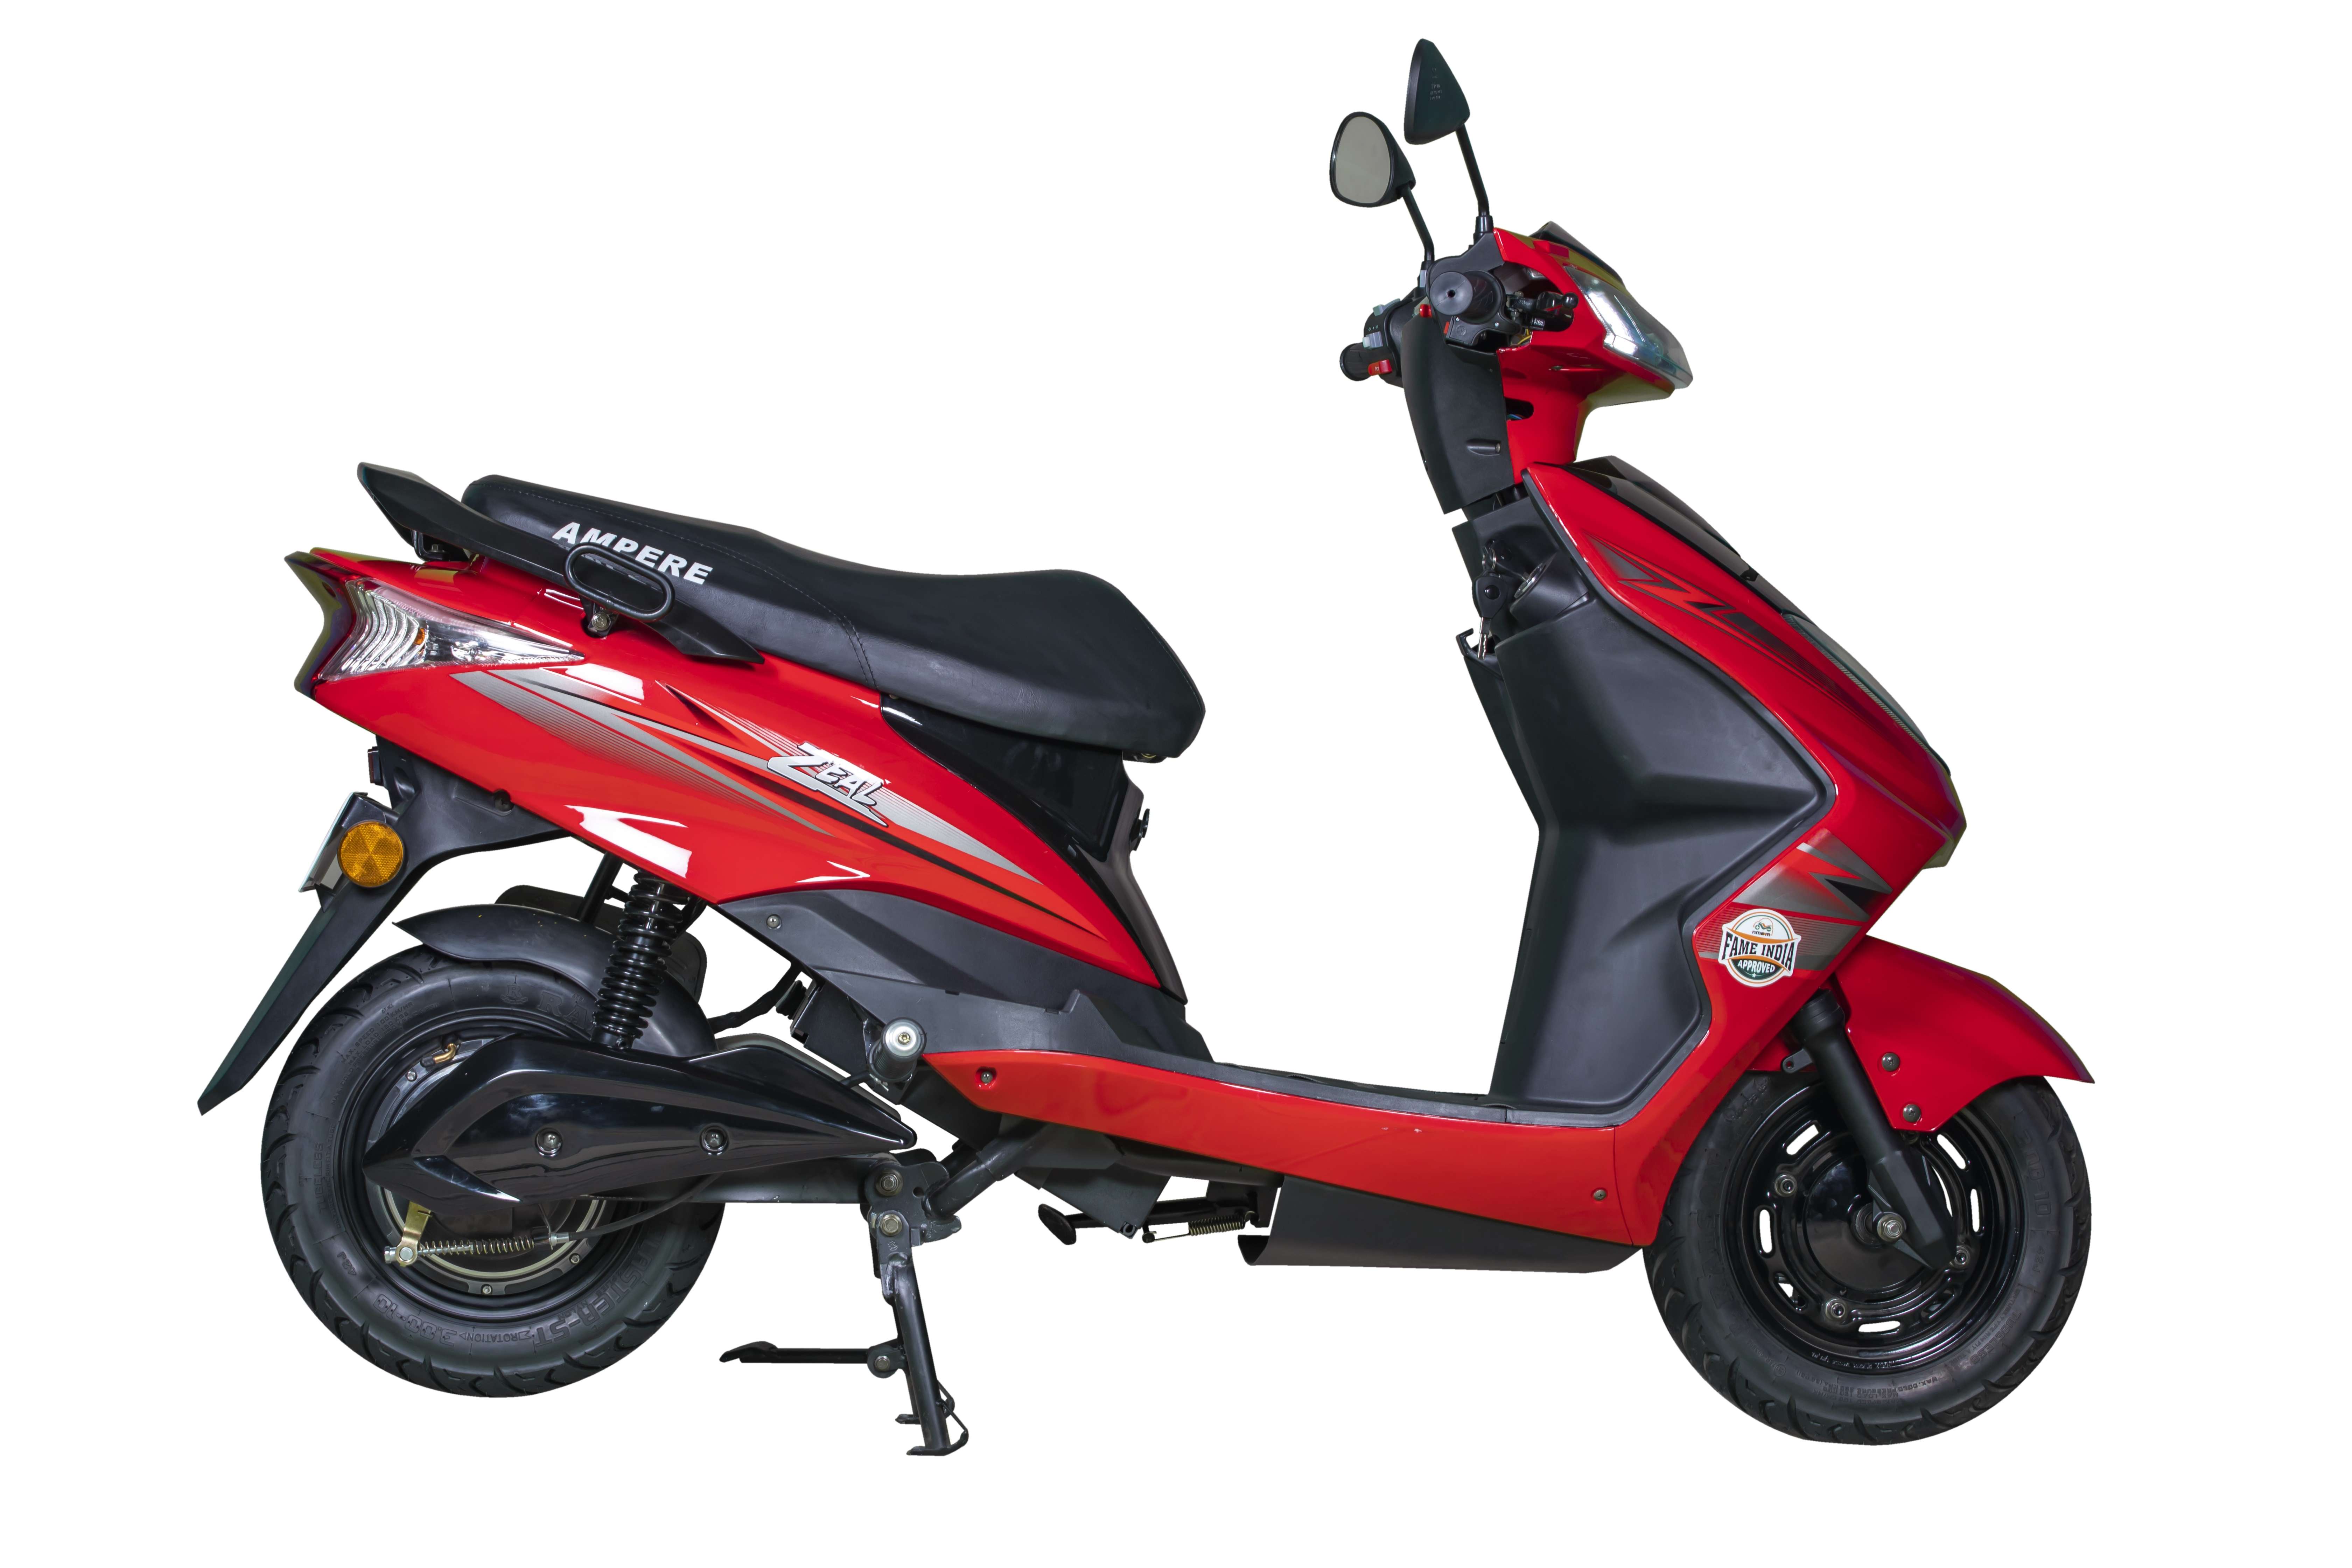 ampere electric scooter price